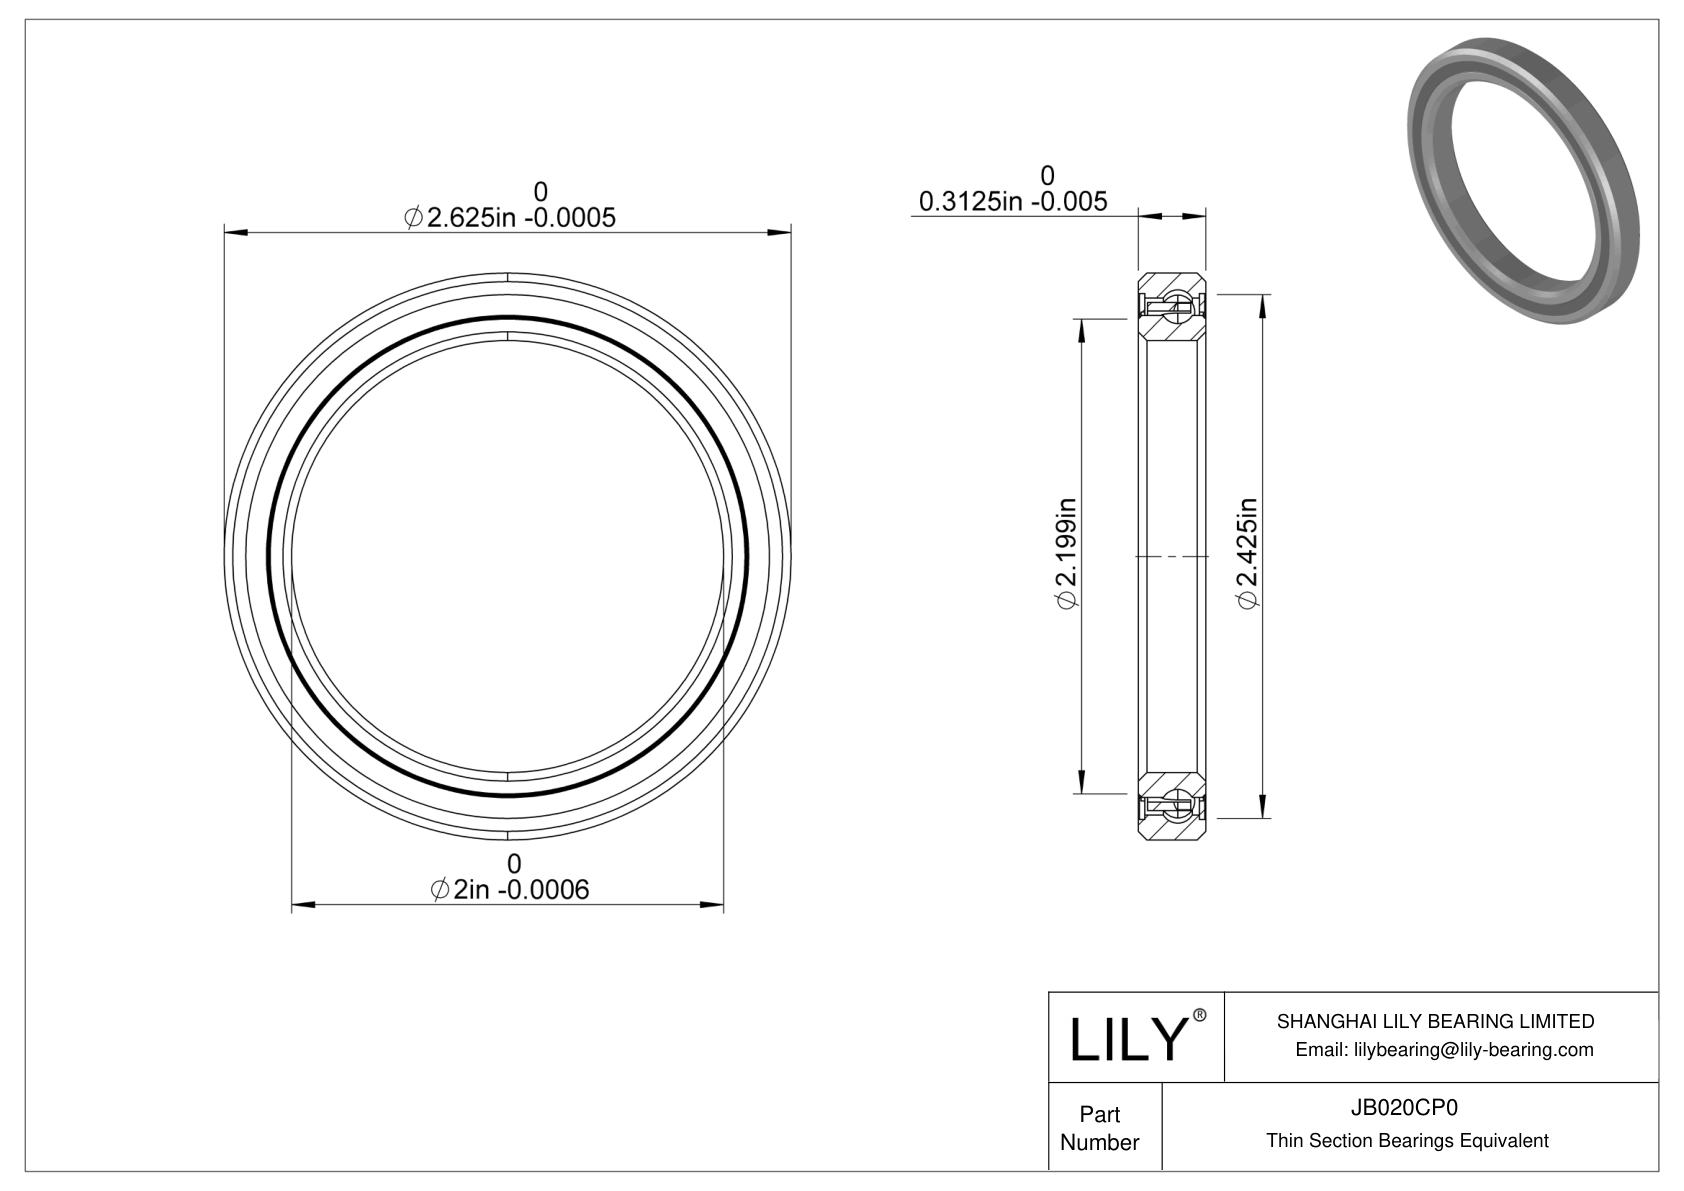 WB020CP0 Constant Section (CS) Bearings cad drawing